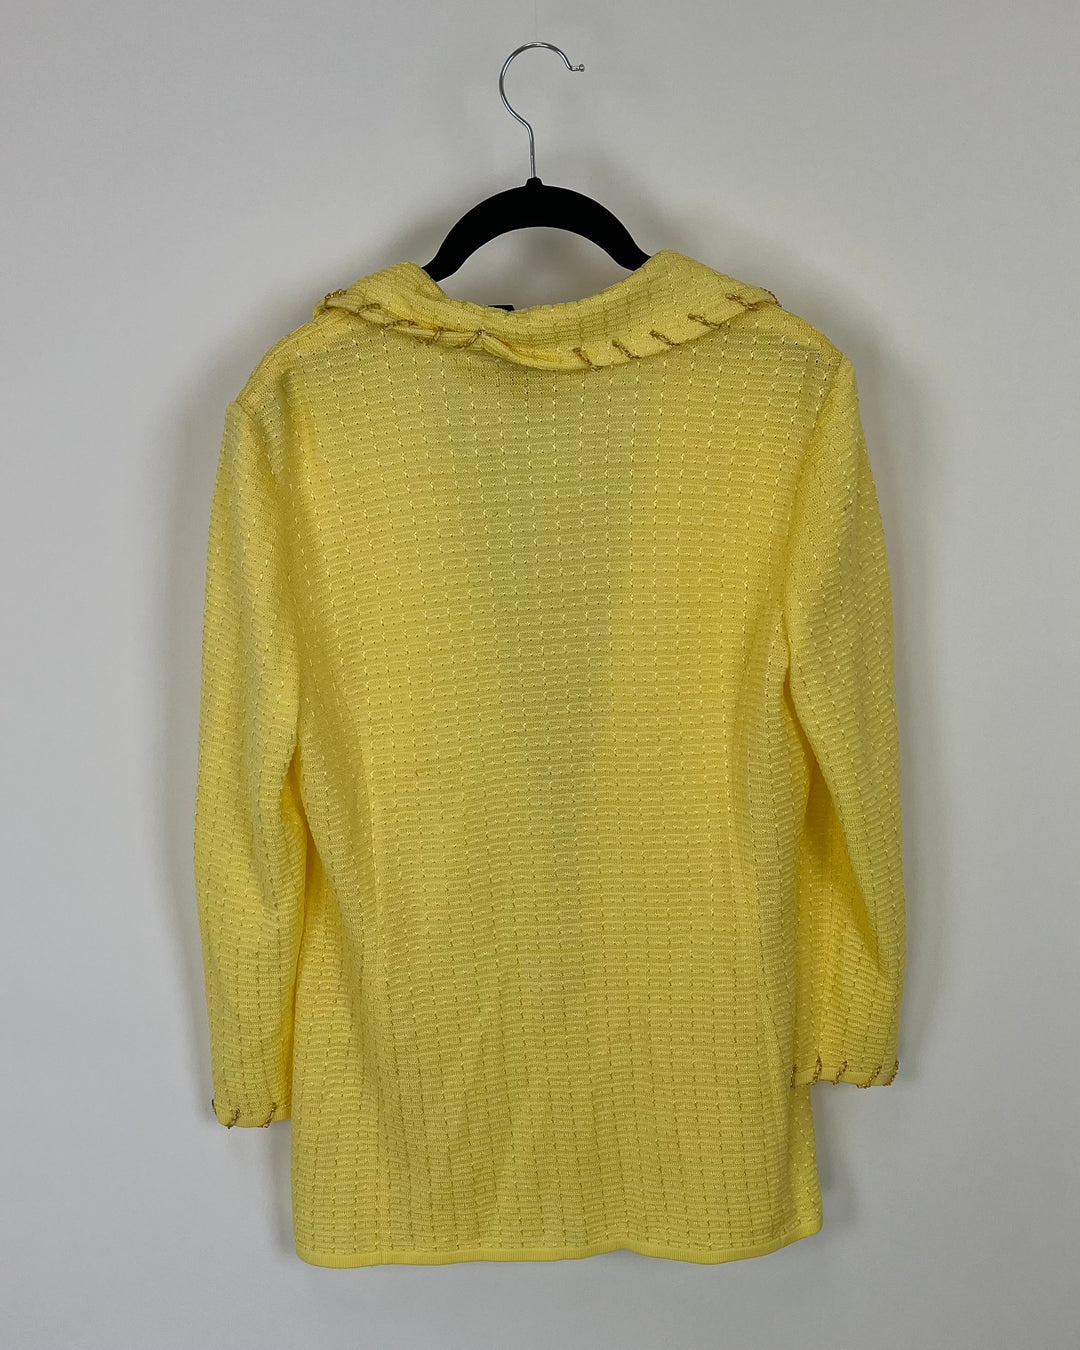 Yellow Cardigan with Gold Chain Trim - Size 2/4